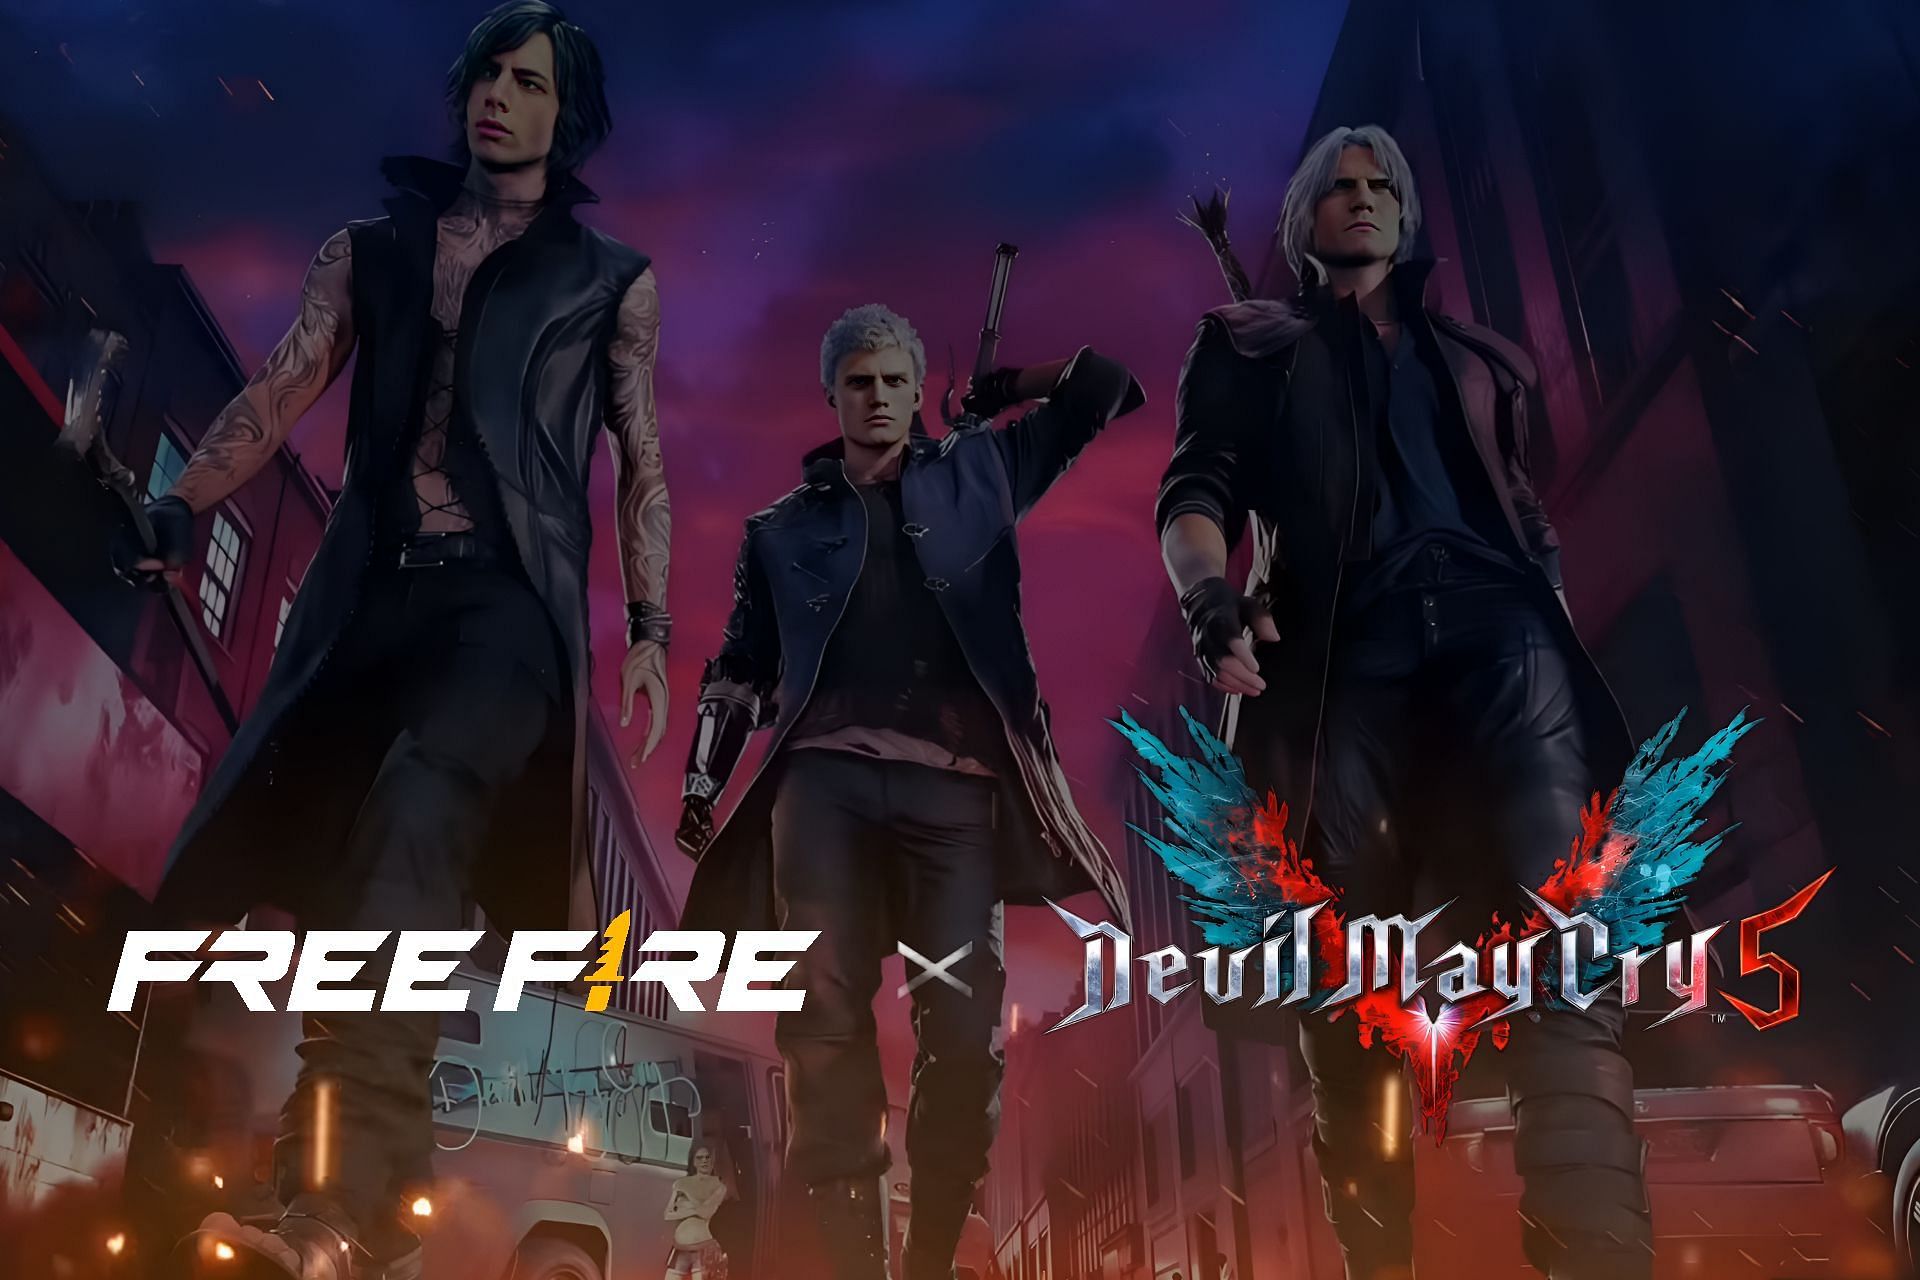 Stream Devil May Cry Anime Opening full by Lagartija FX  Listen online  for free on SoundCloud